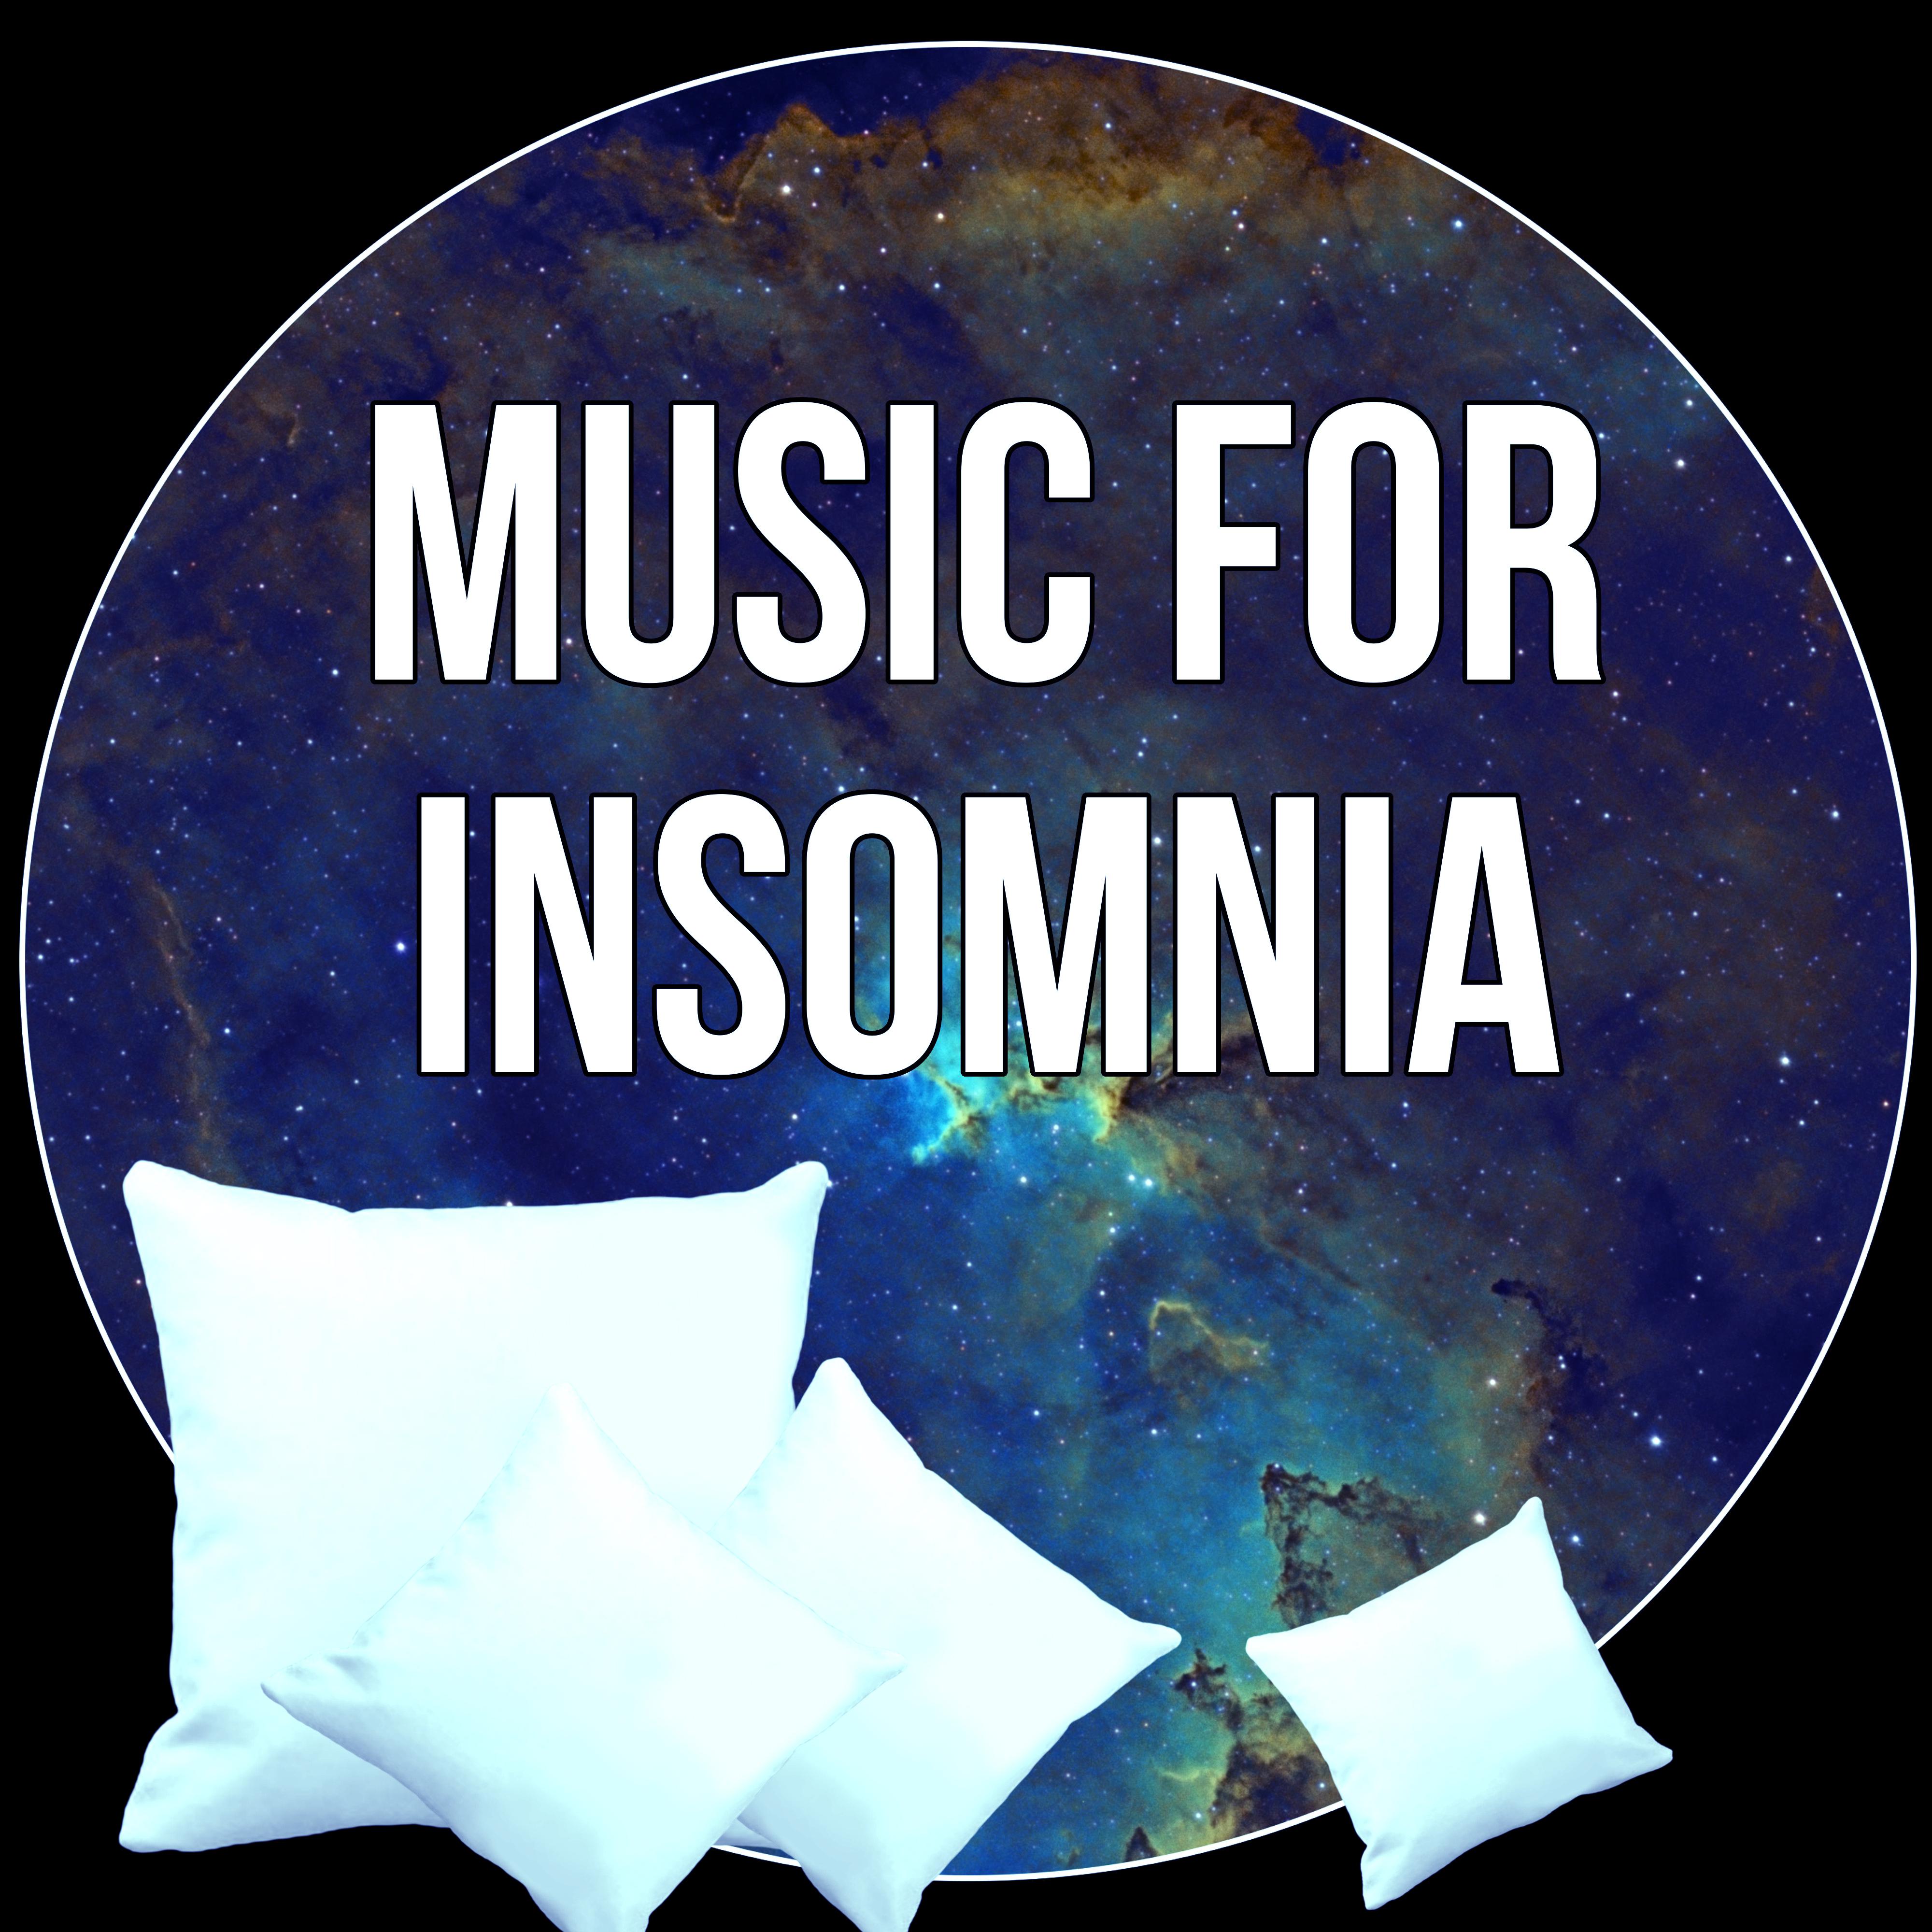 Music for Insomnia  New Age Sounds for Restful Sleep, Sounds of Silence, Deep Relax  Good Dreams with Gentle Music